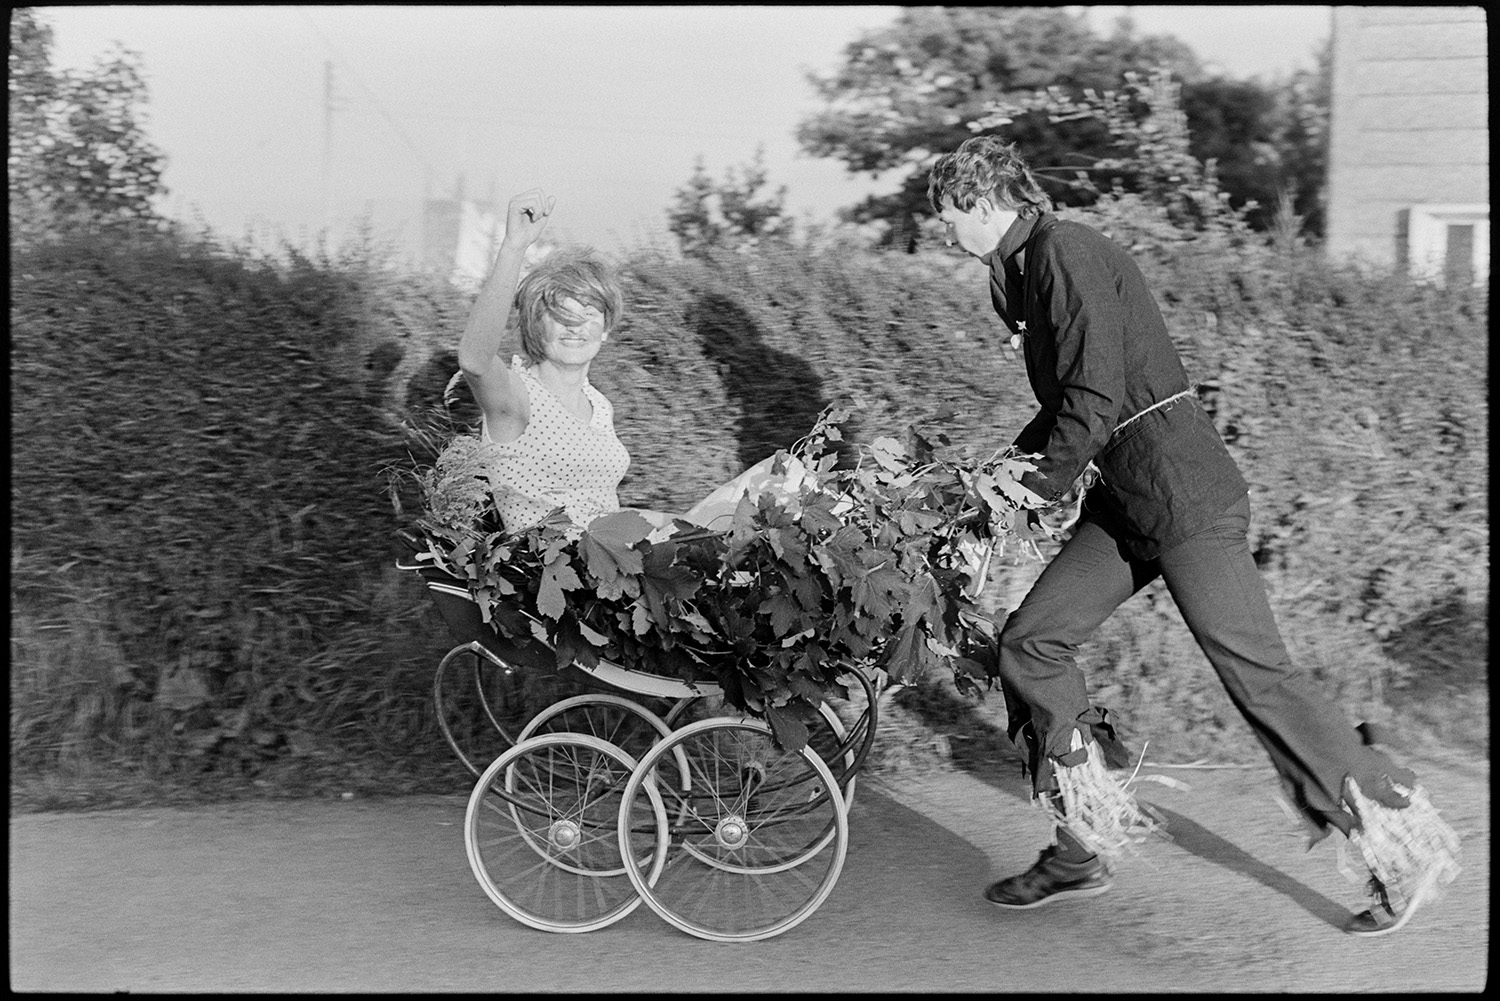 Fancy dress, pram race around village.
[Two people in fancy dress competing in a pram race around the village during Winkleigh Fair. One person is riding in the old pram covered in leaves, while the other pushes it.]